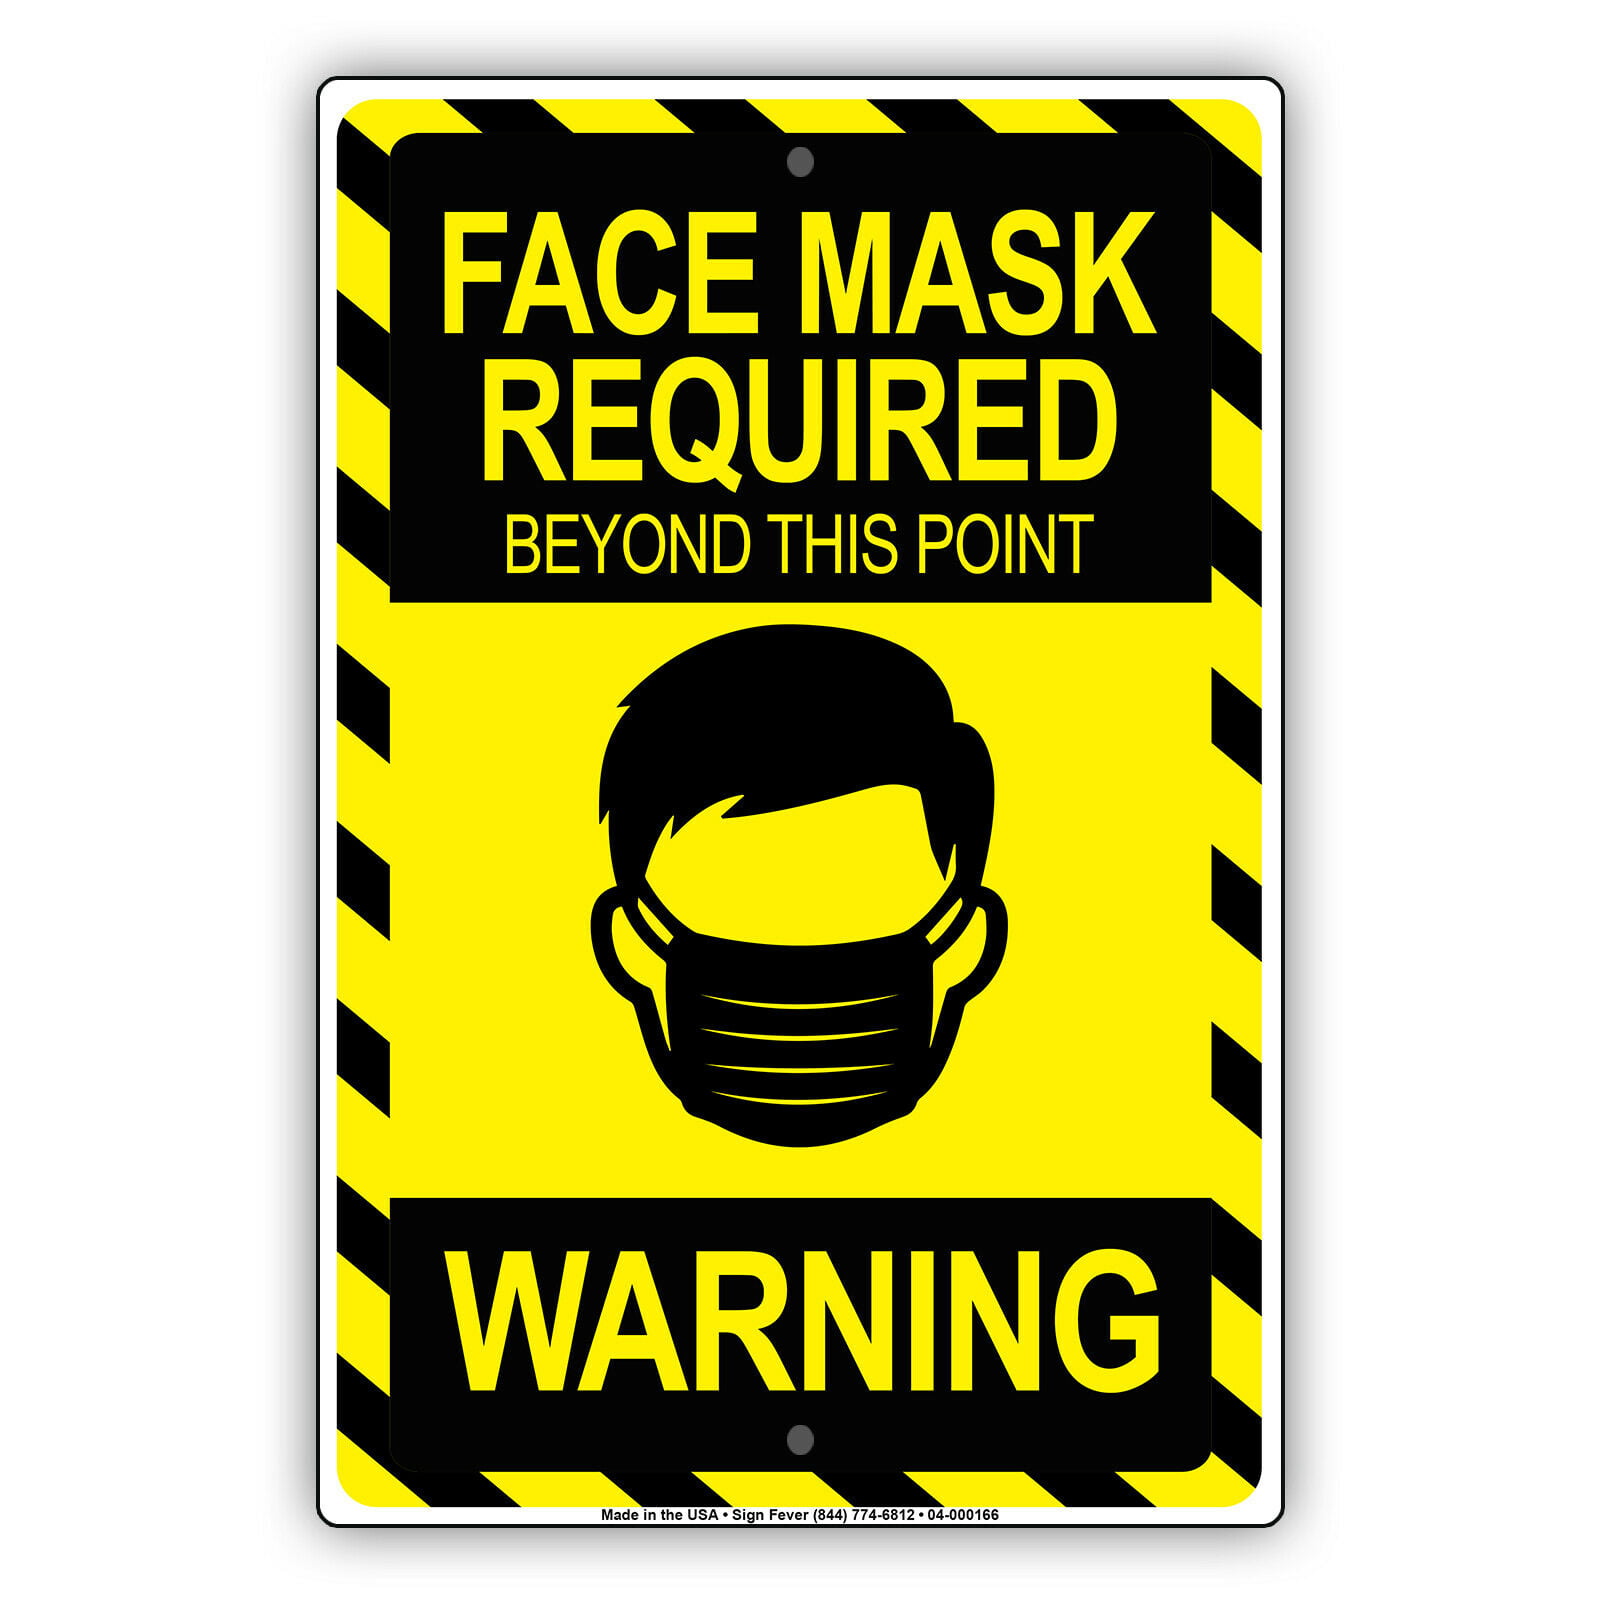 NOTICE FACE MASK Sign beyond this point ALUMINUM NEVER RUST HI QUALITY SIGN #707 